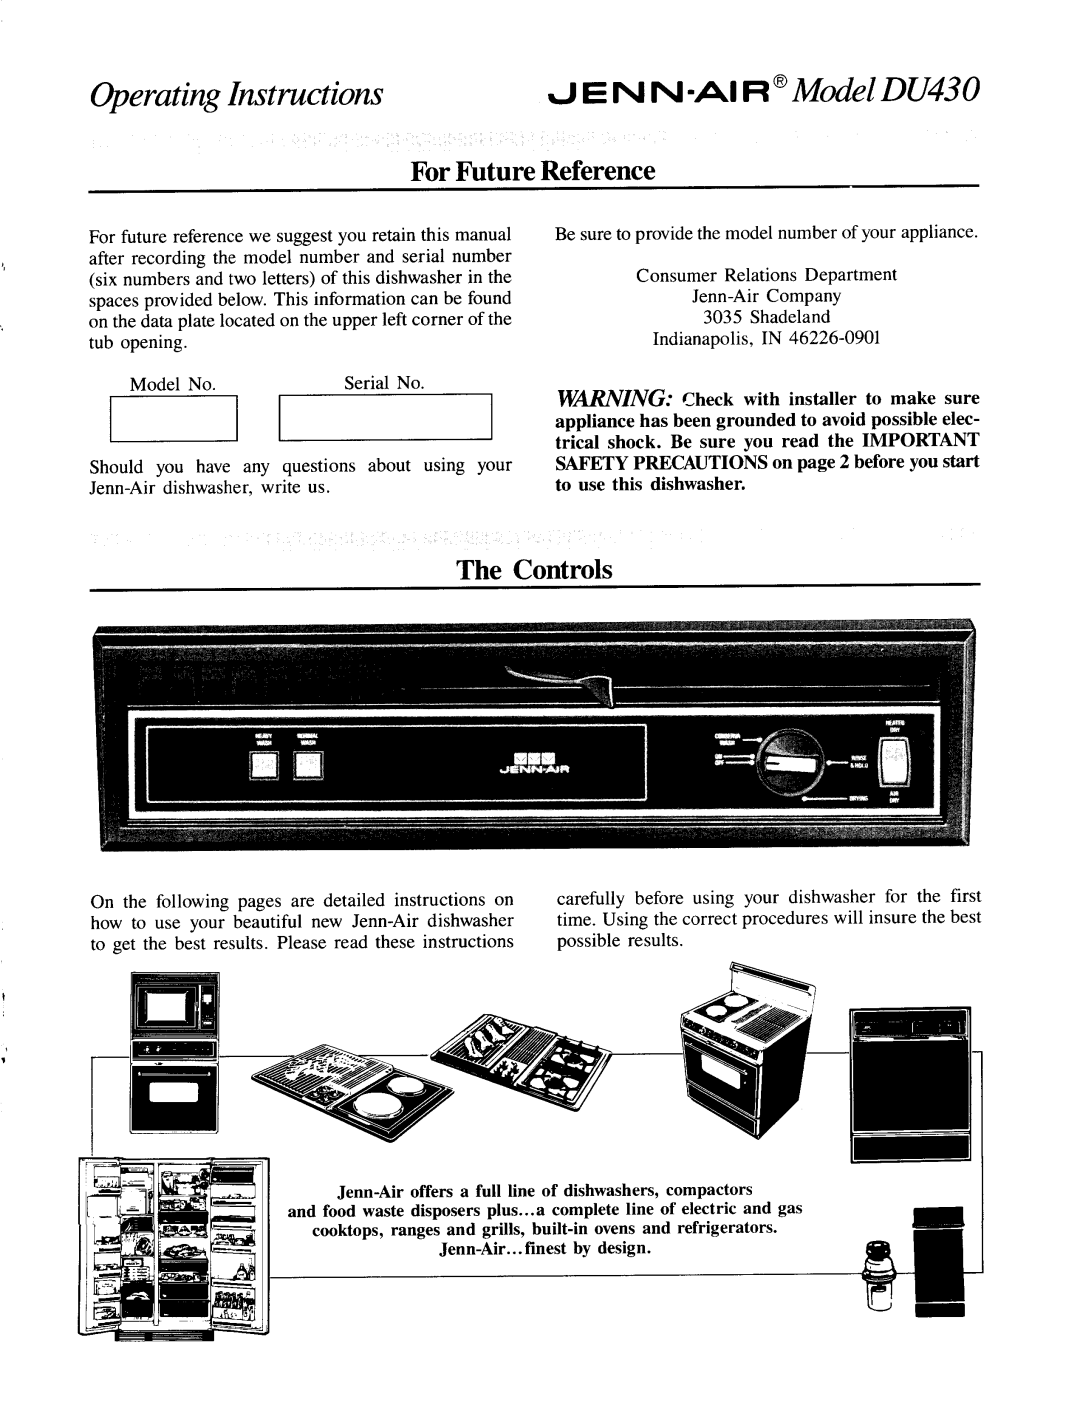 Jenn-Air manual For Future Reference, Operating Instructions, E N N-AI R Model DU430, The Controls 